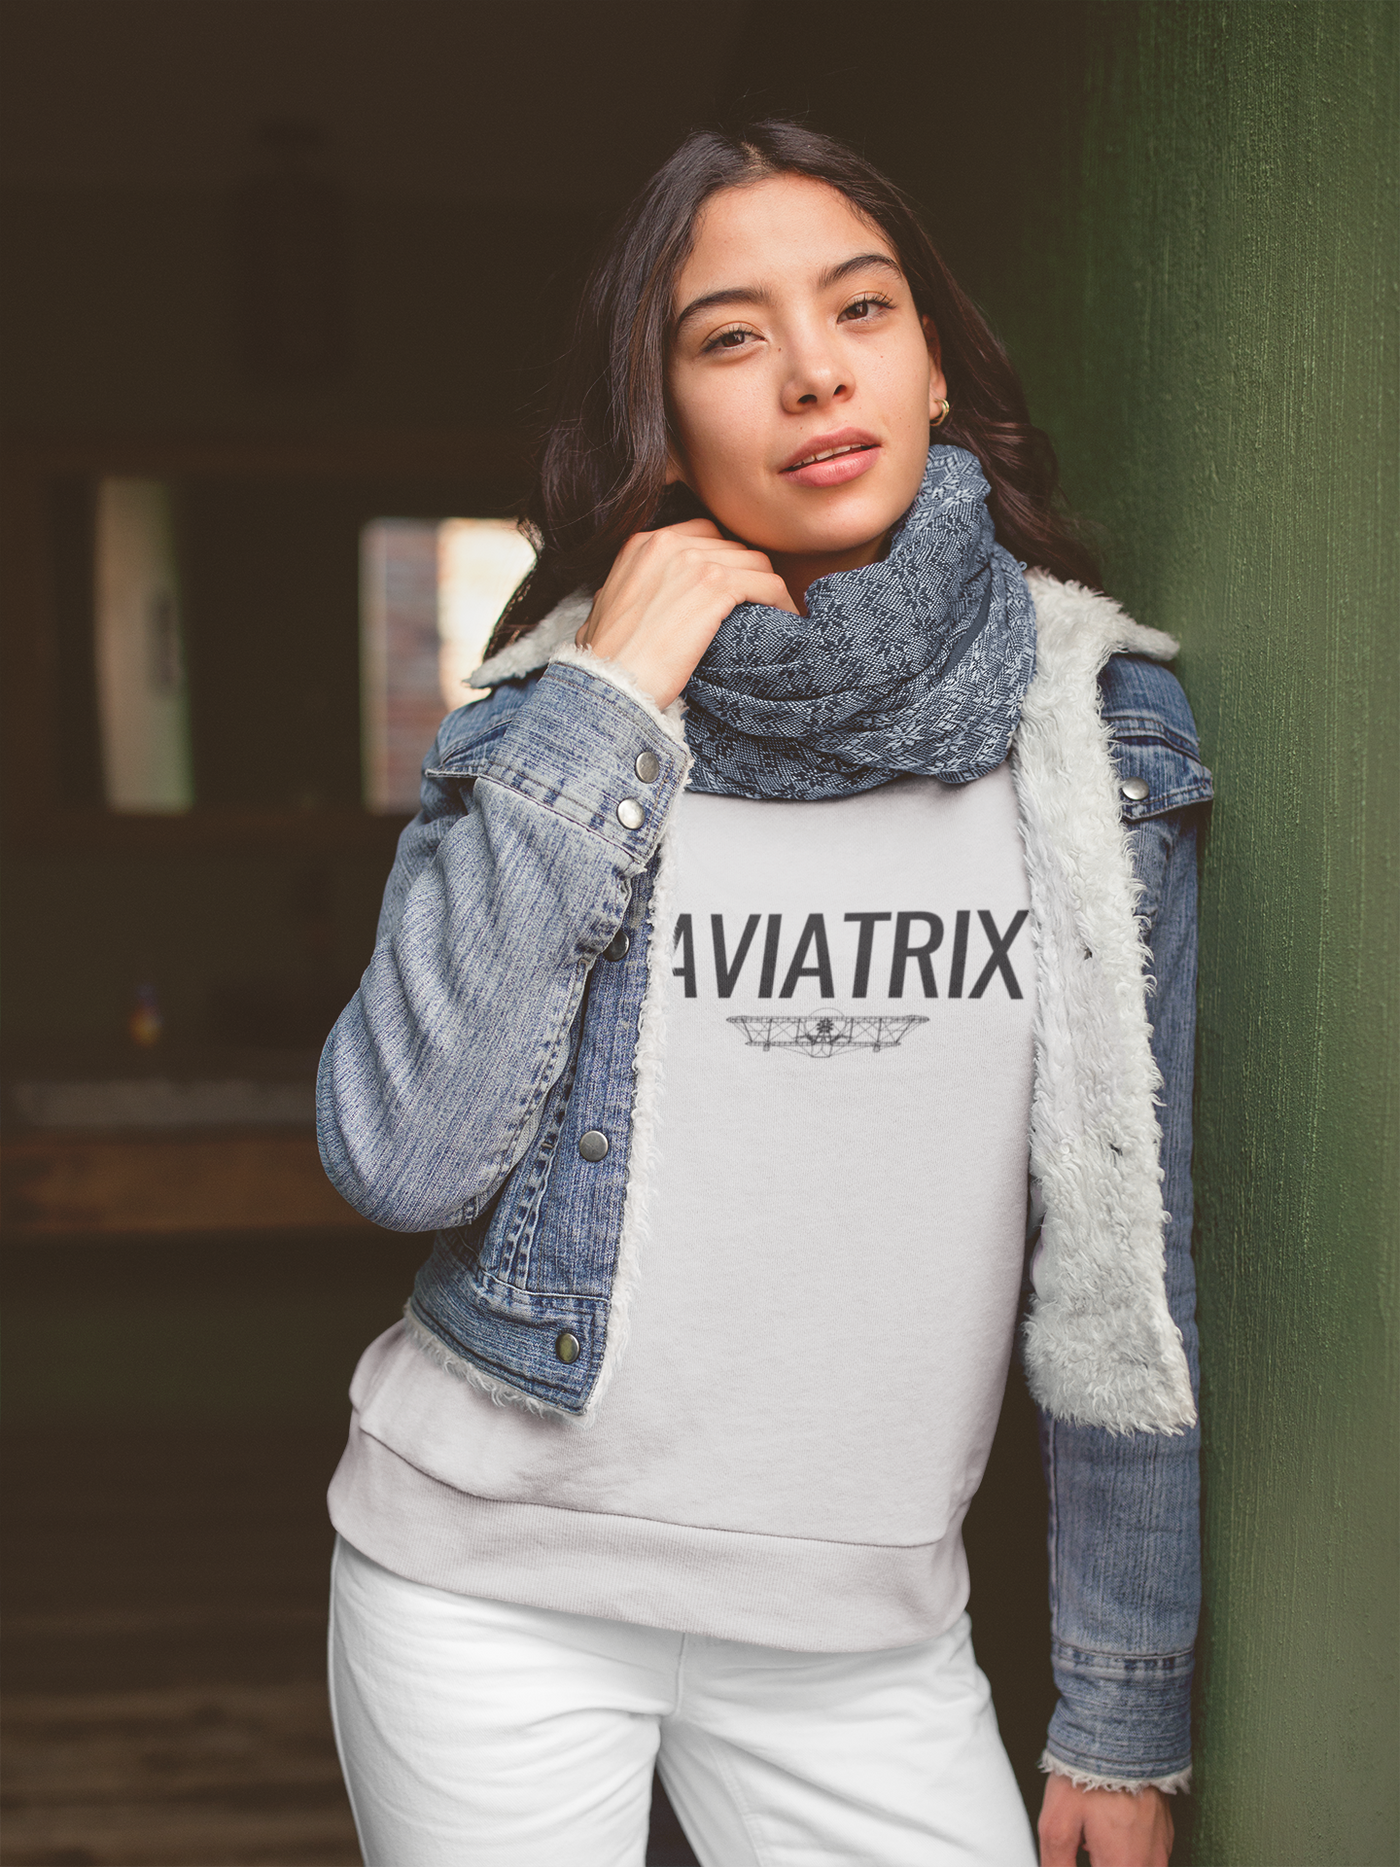 Get trendy with Unisex Aviatrix Sweatshirt -  available at SWCH Store. Grab yours for £45 today!